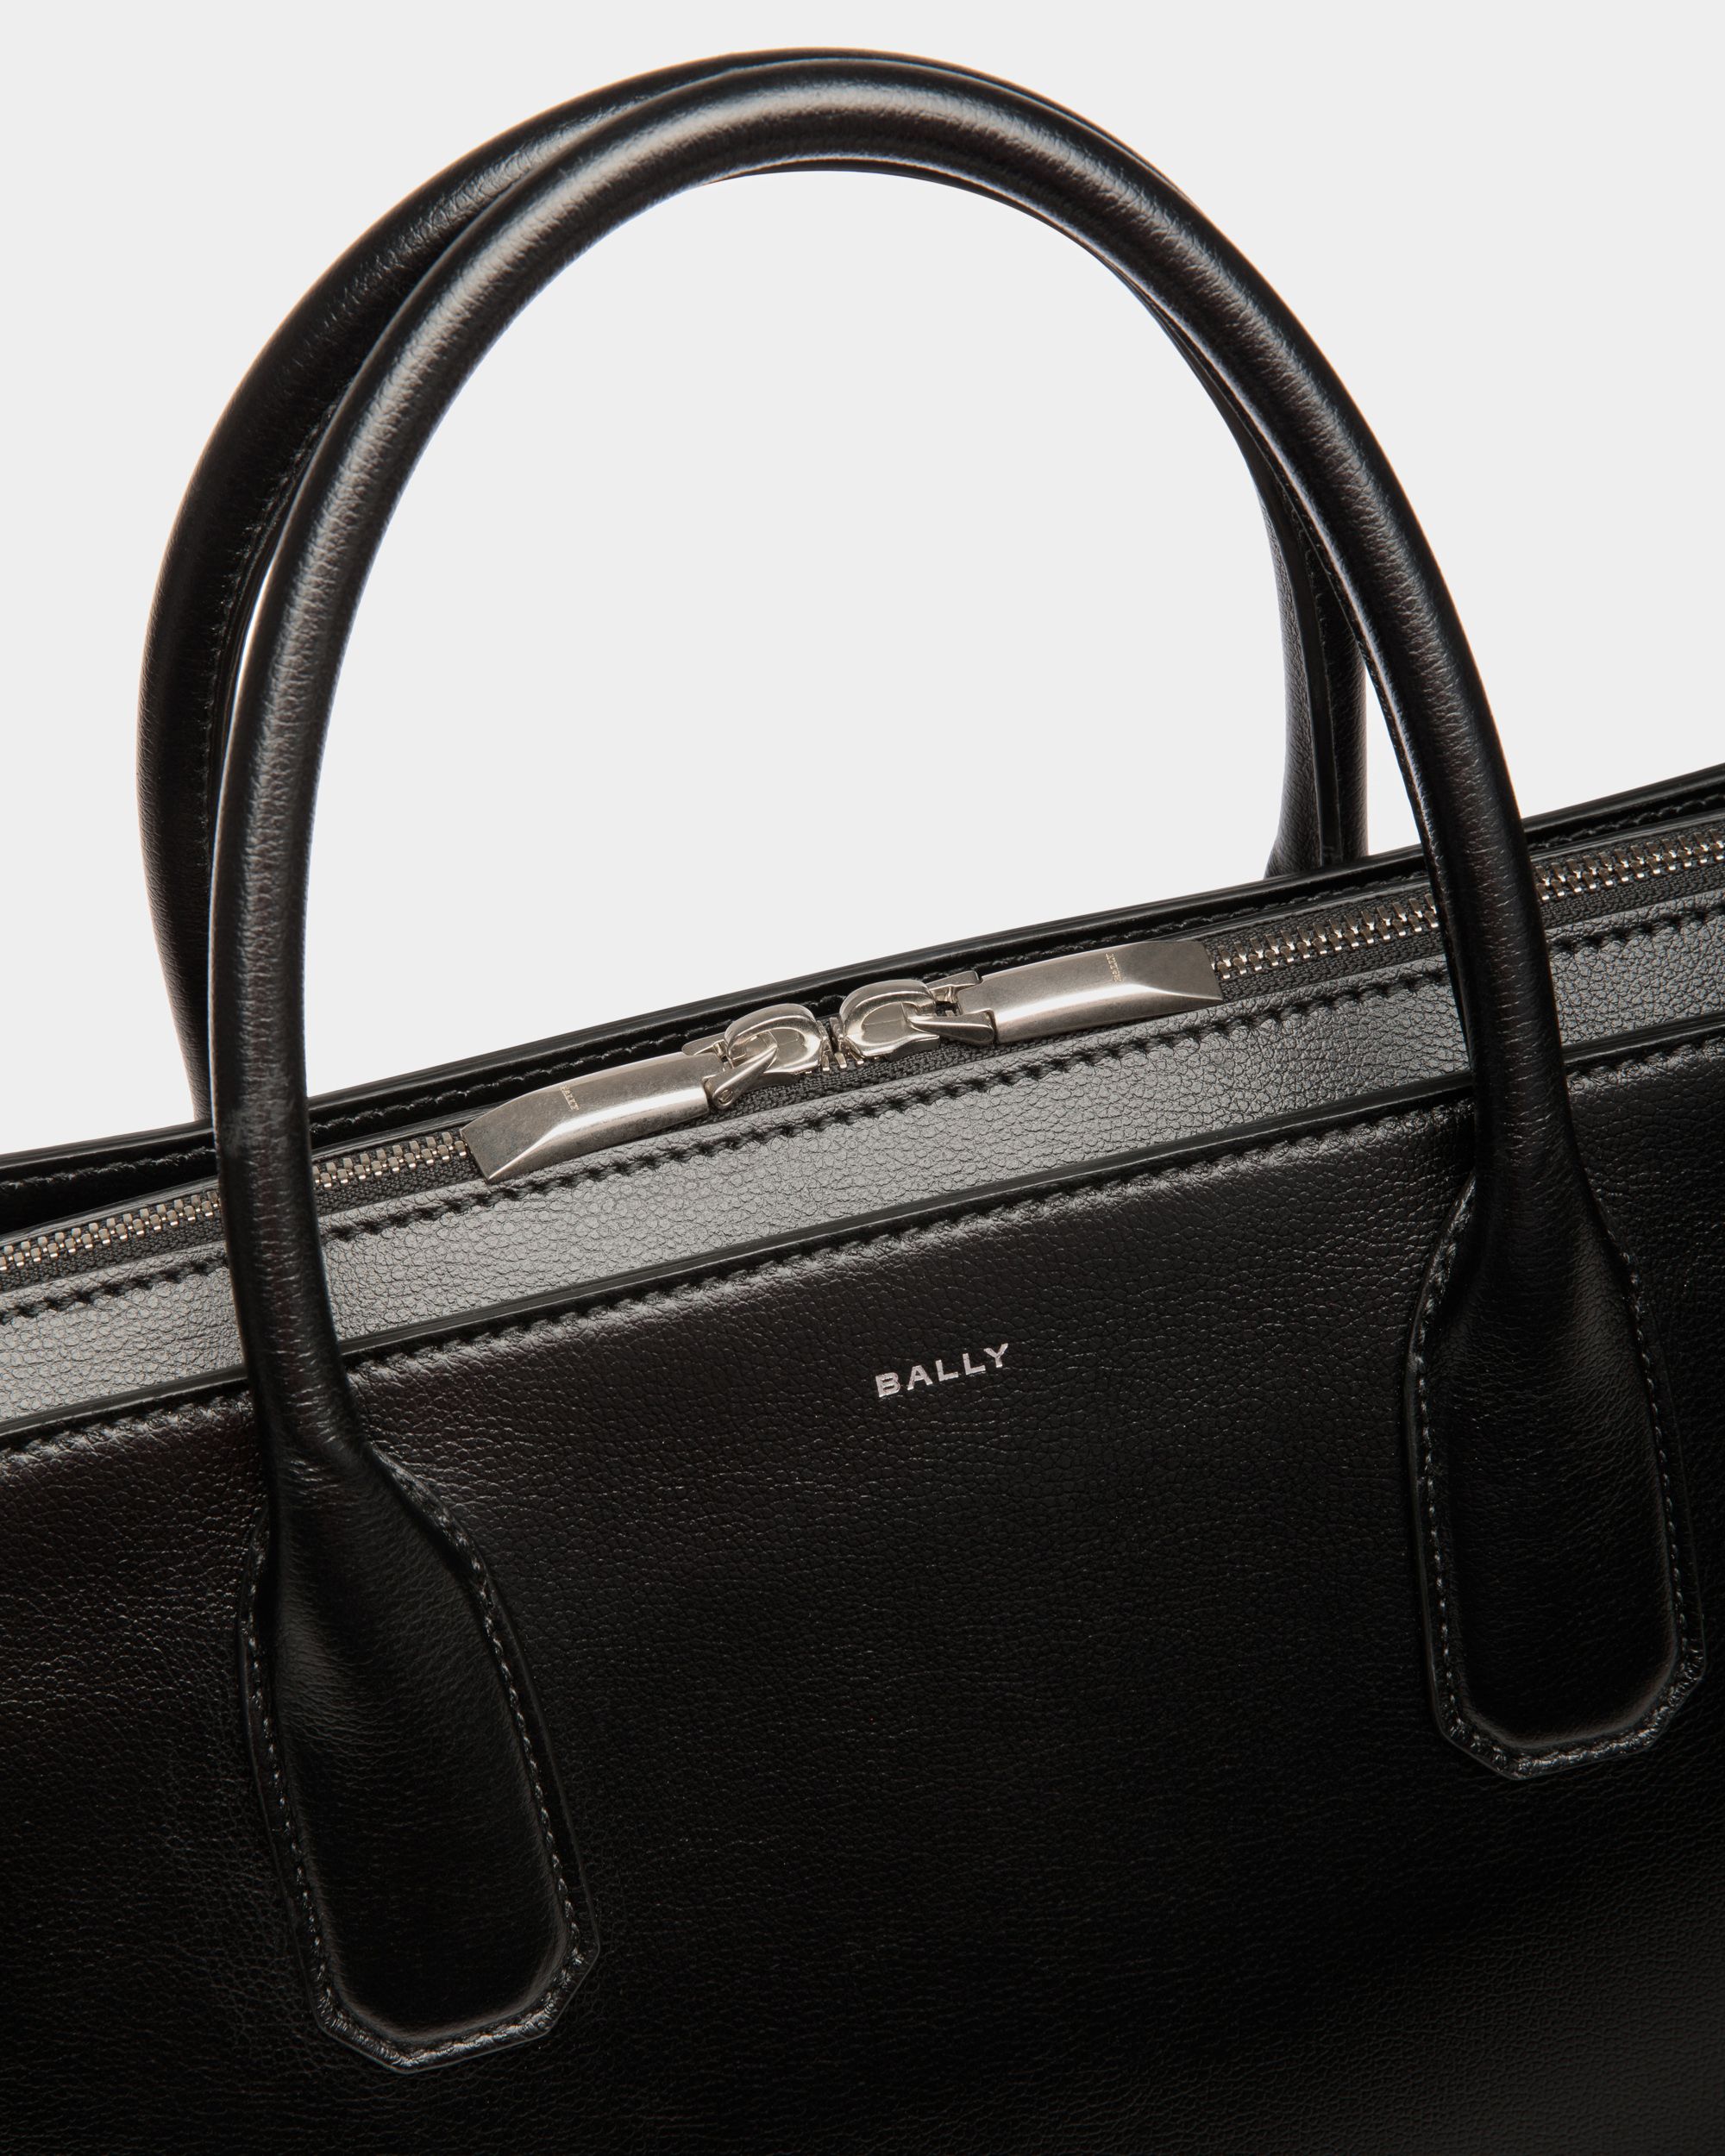 Busy | Men's Business Bag | Black Leather | Bally | Still Life Detail